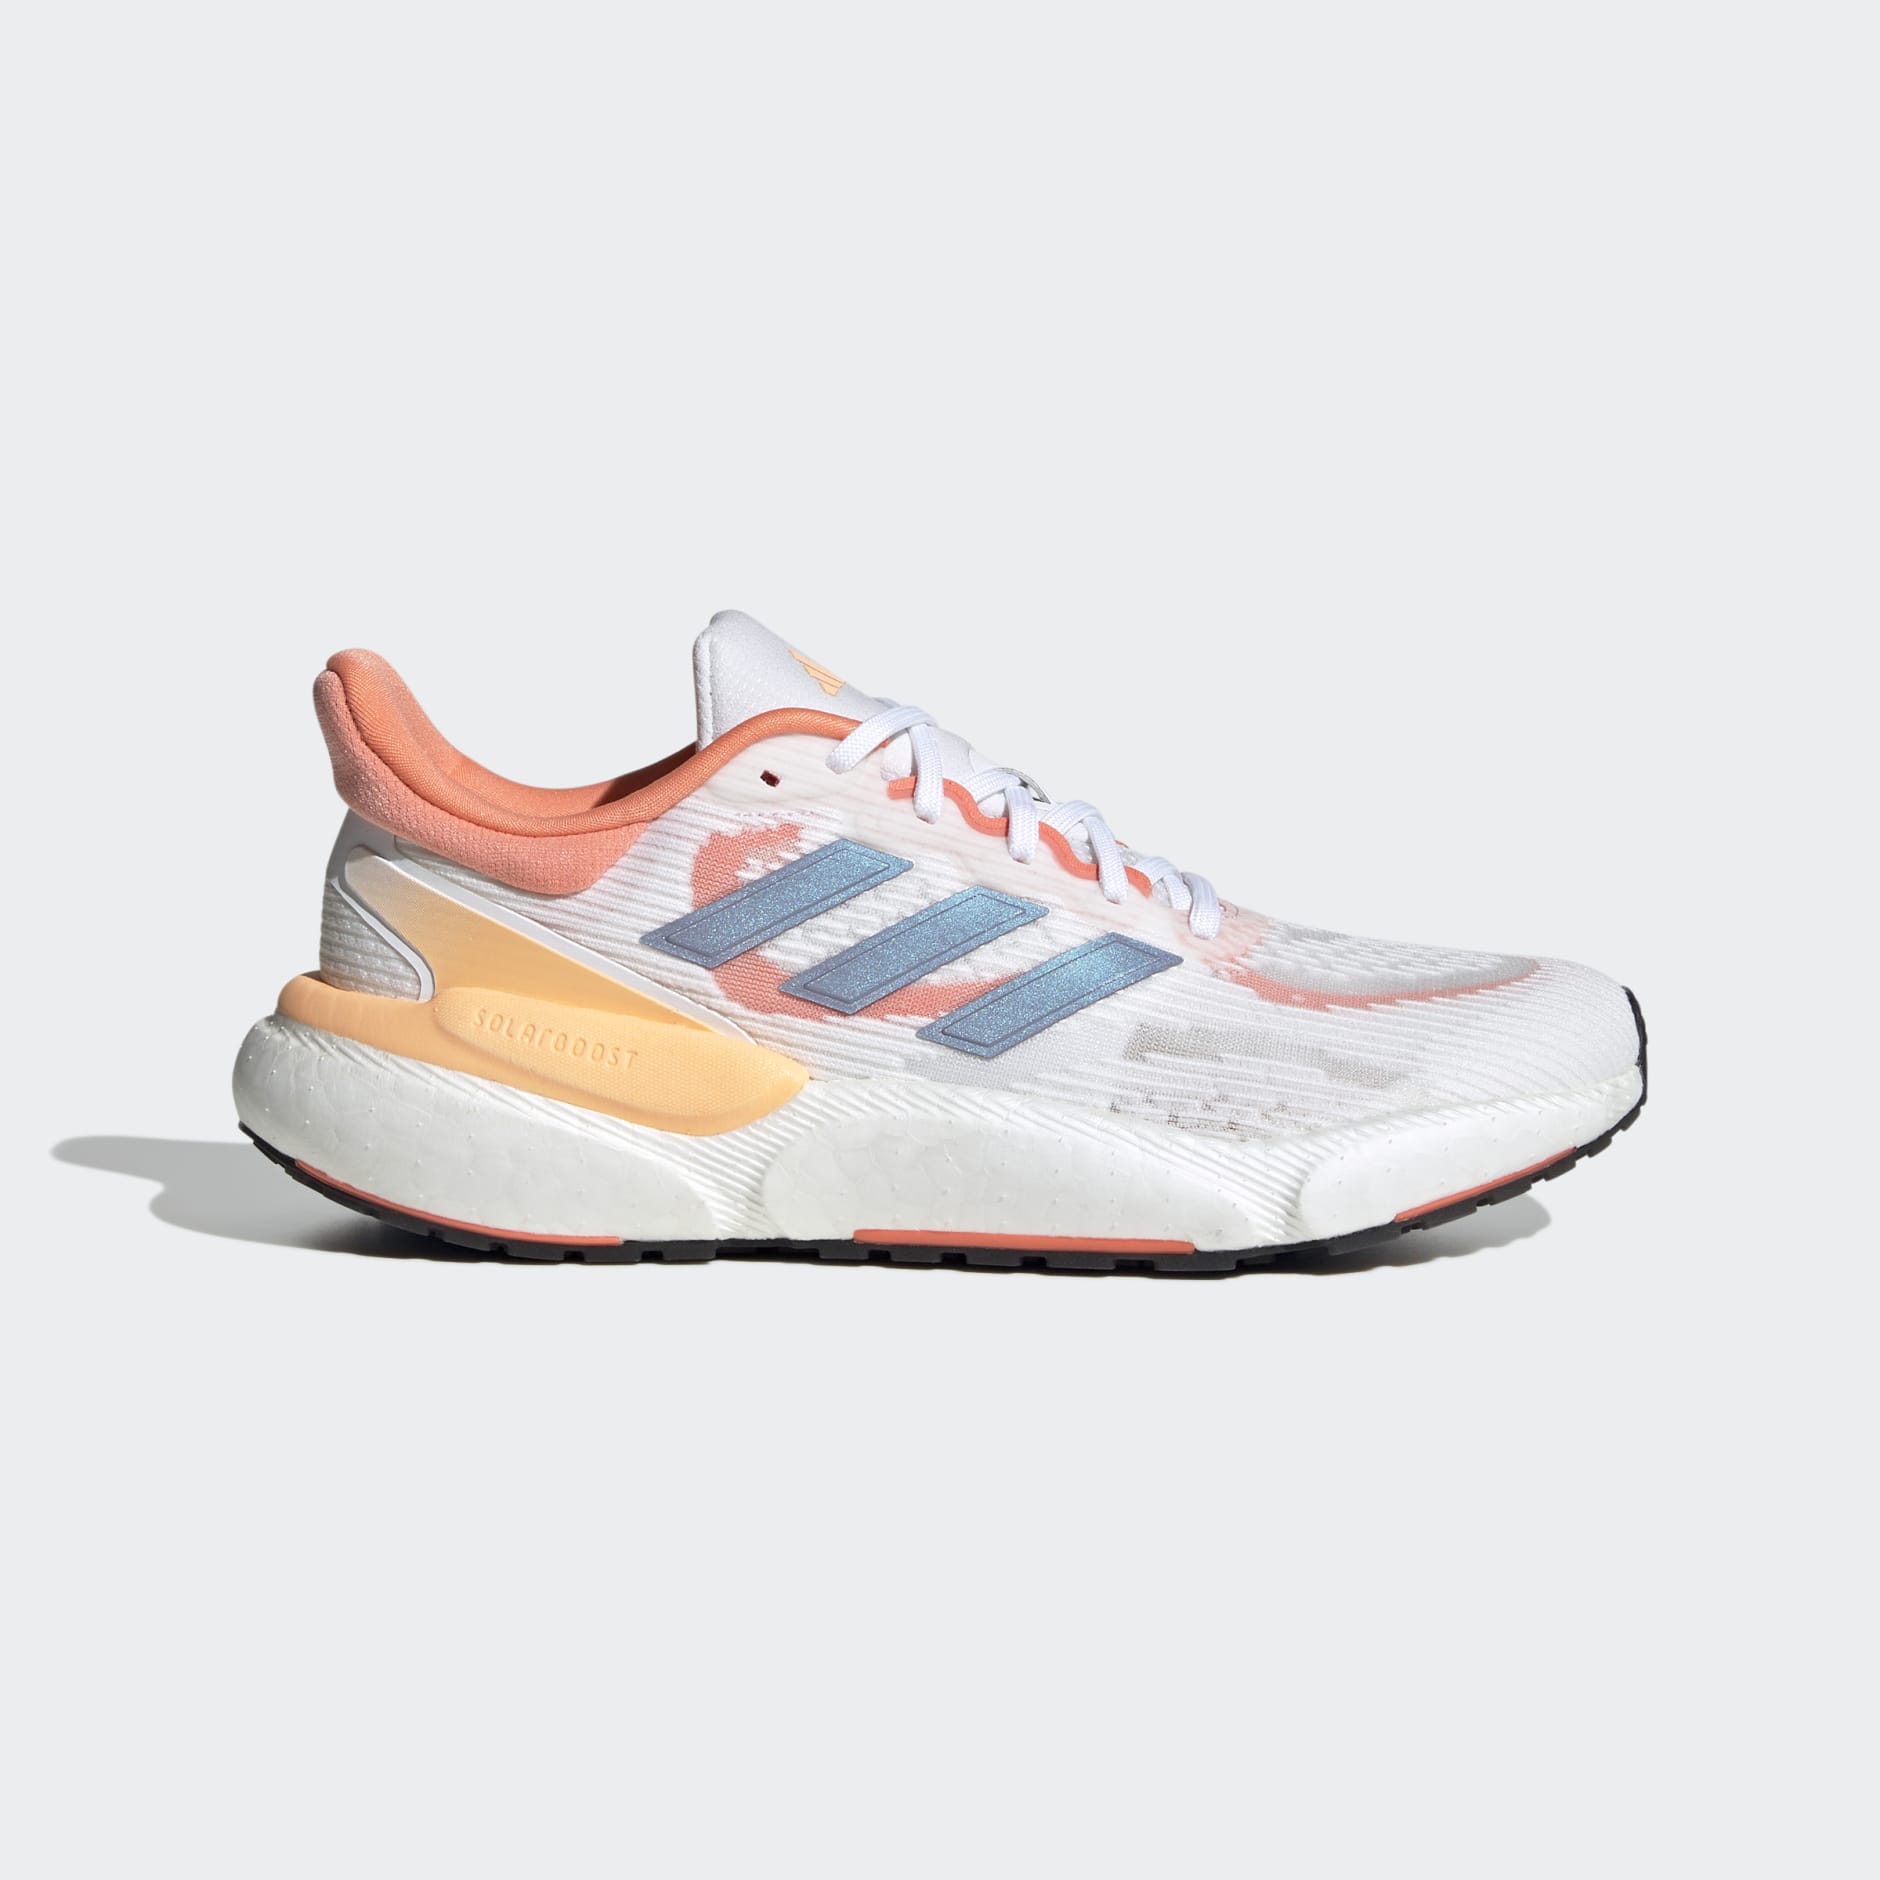 adidas Solarboost 5 Shoes - adidas